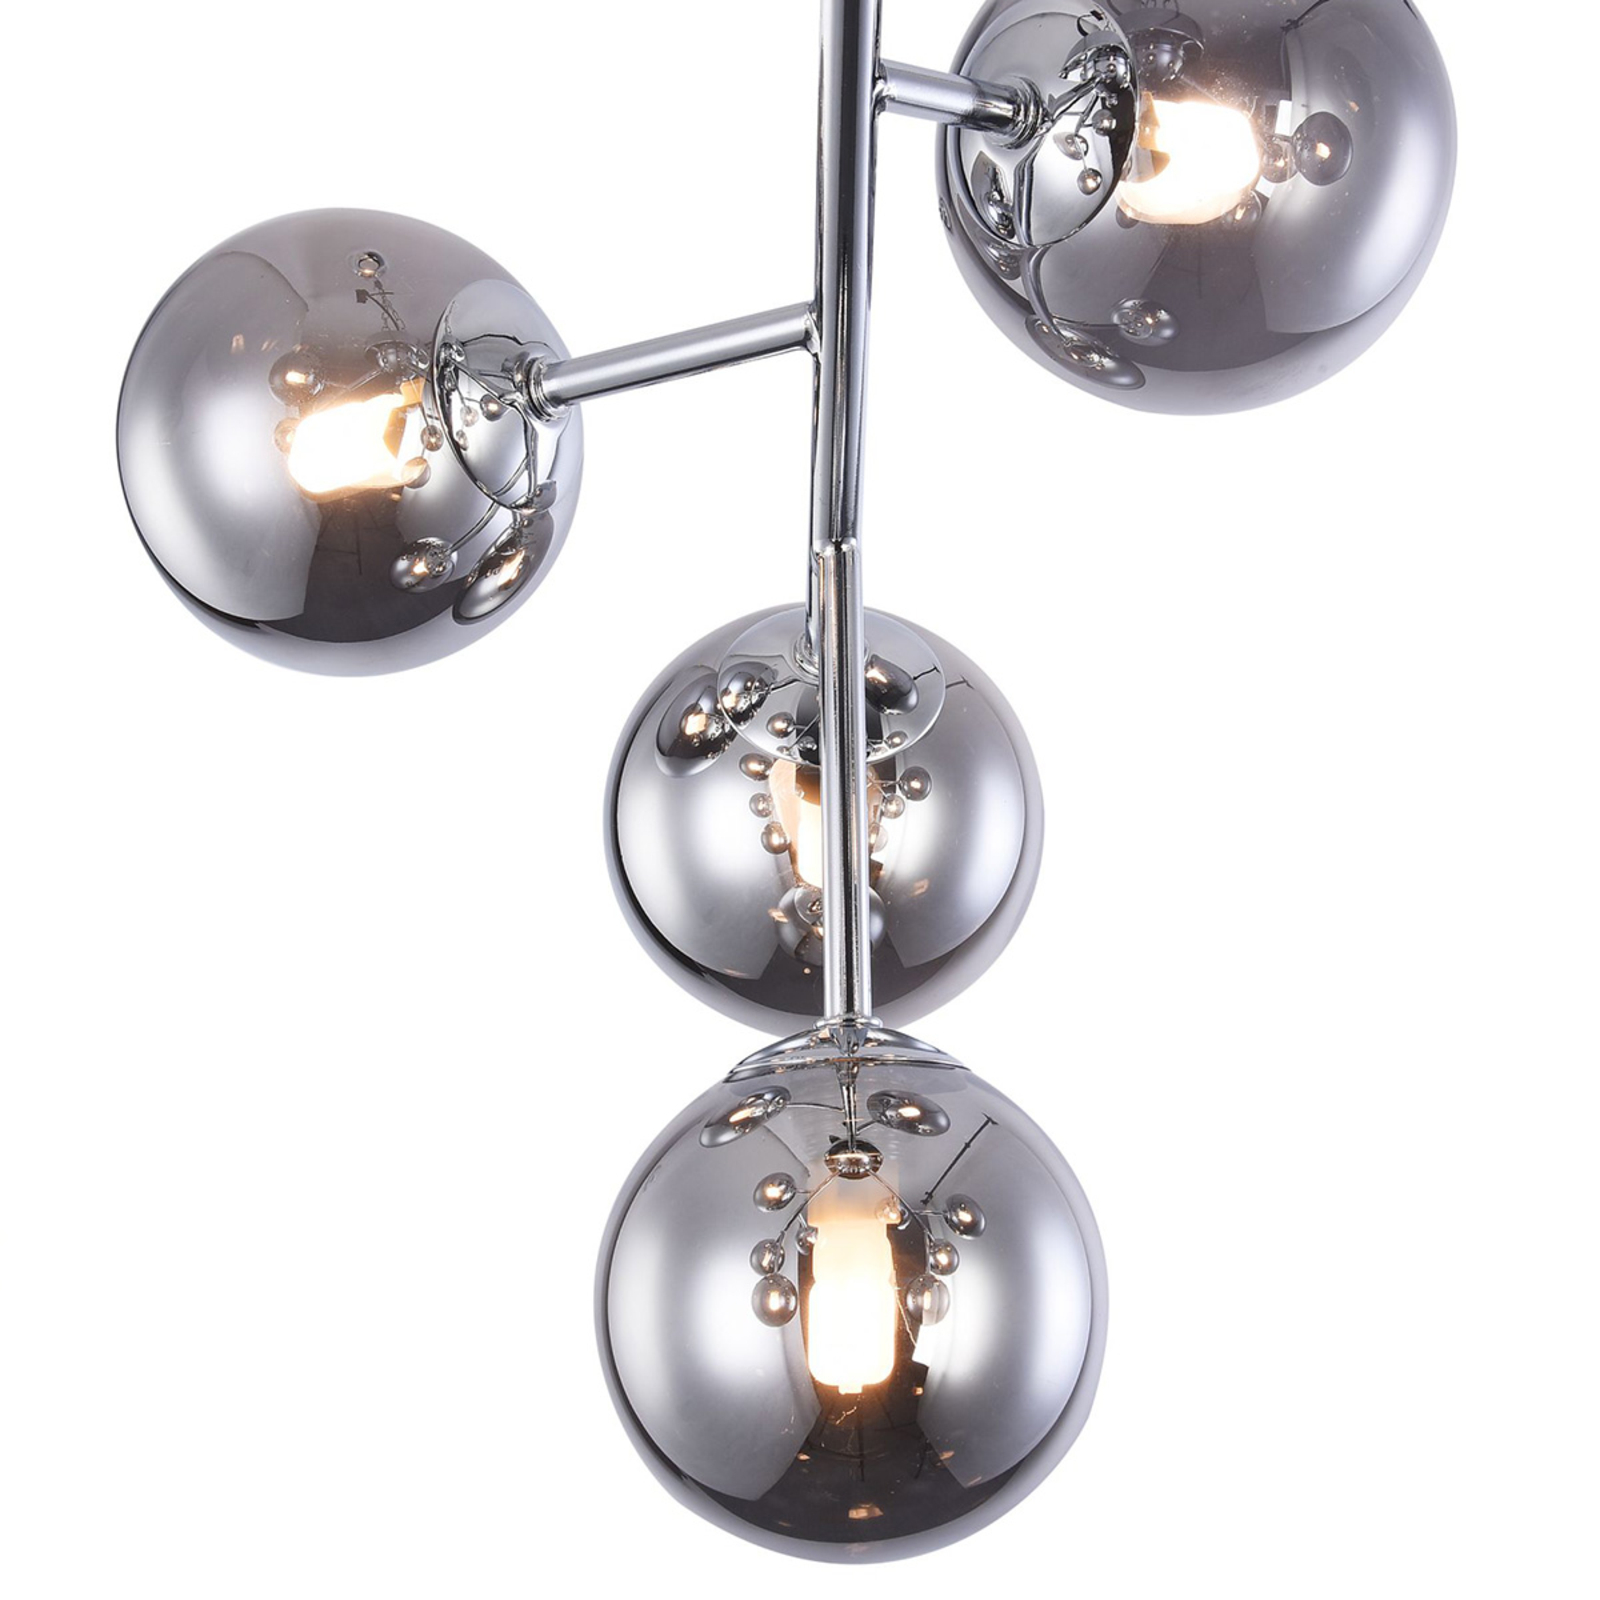 Dallas ceiling light with 12 glass spheres, chrome